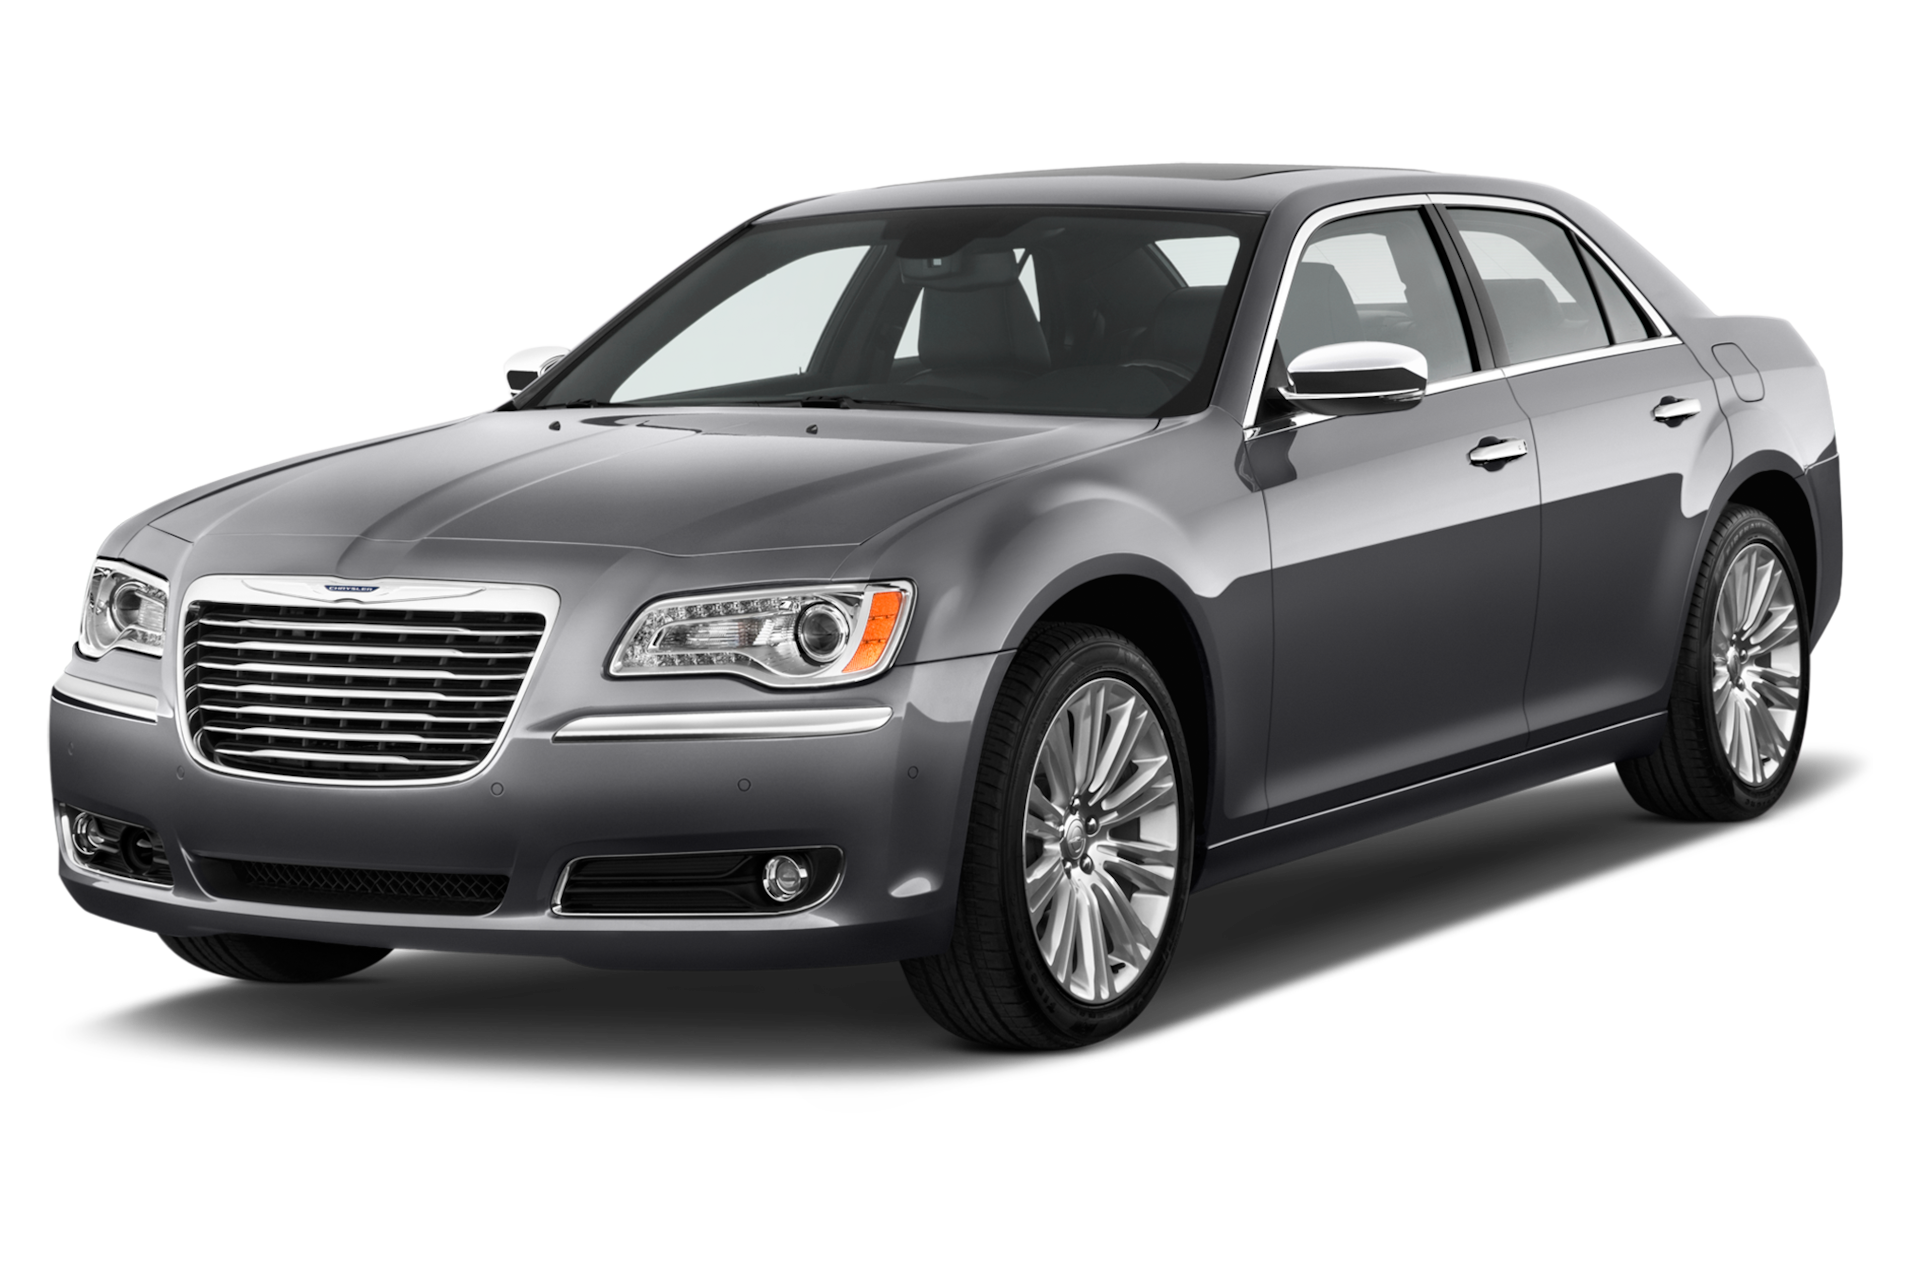 2014 Chrysler 300 Prices, Reviews, and Photos - MotorTrend